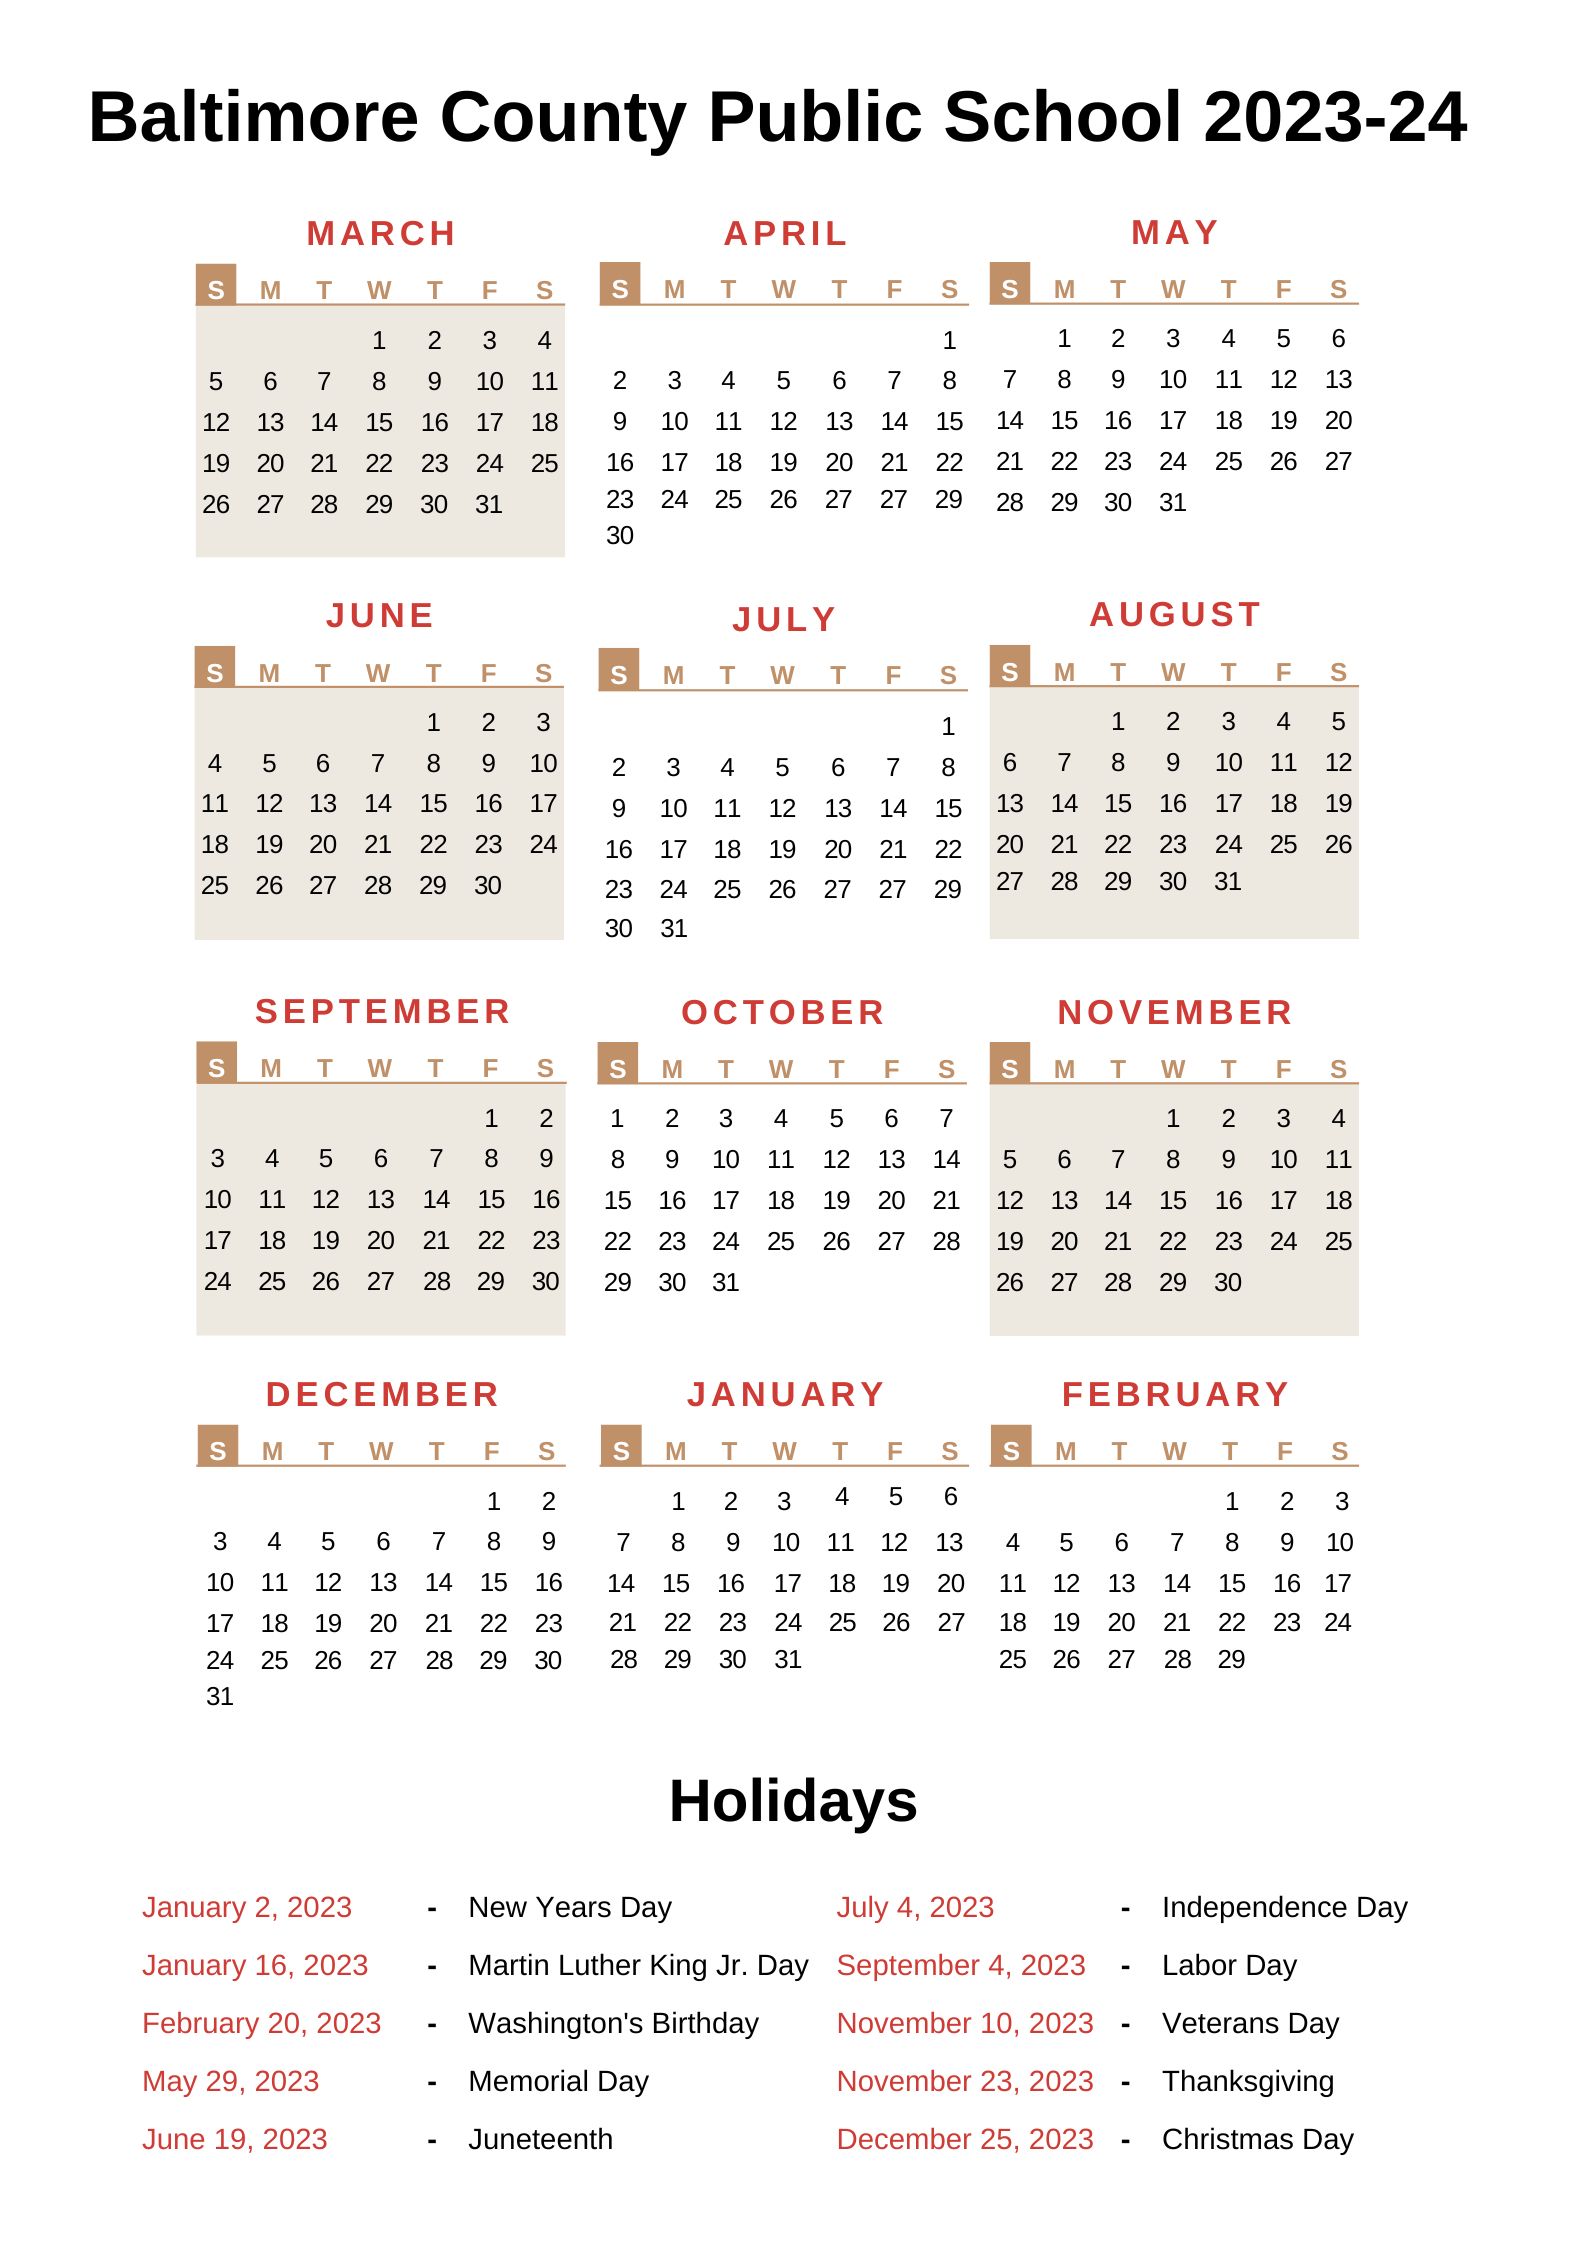 Baltimore County Public Schools Calendar 202324 With Holidays